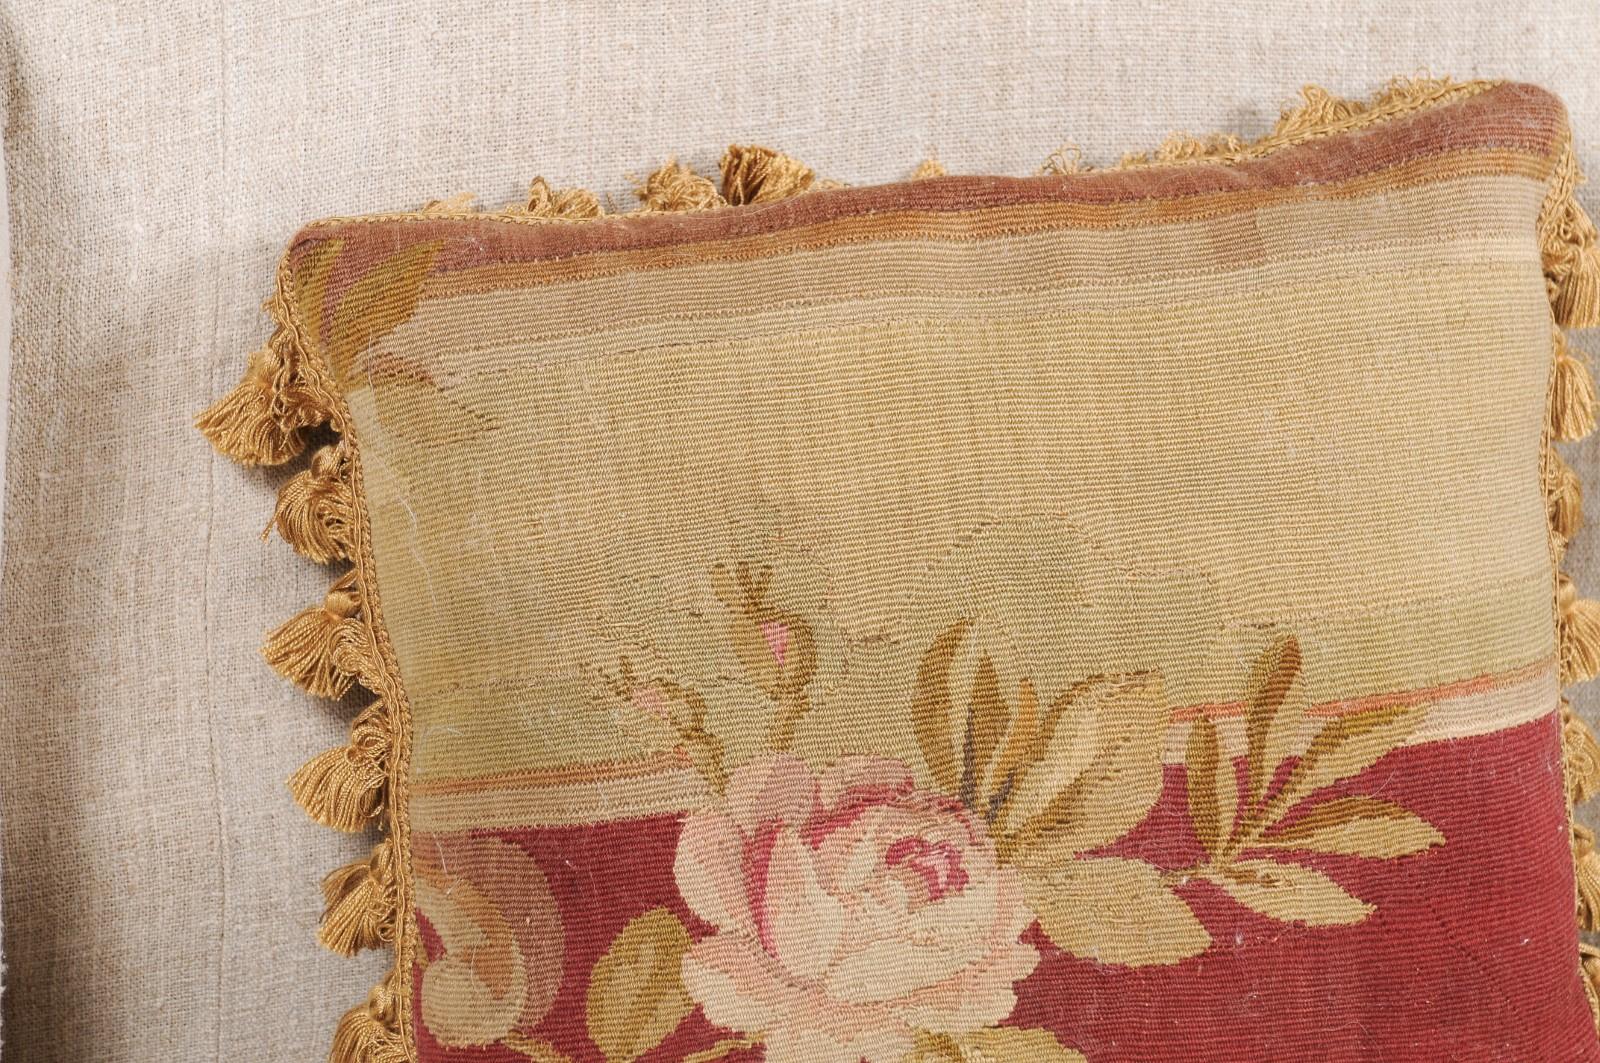 French 19th Century Aubusson Tapestry Pillow with Rose, Foliage and Tassels In Good Condition For Sale In Atlanta, GA